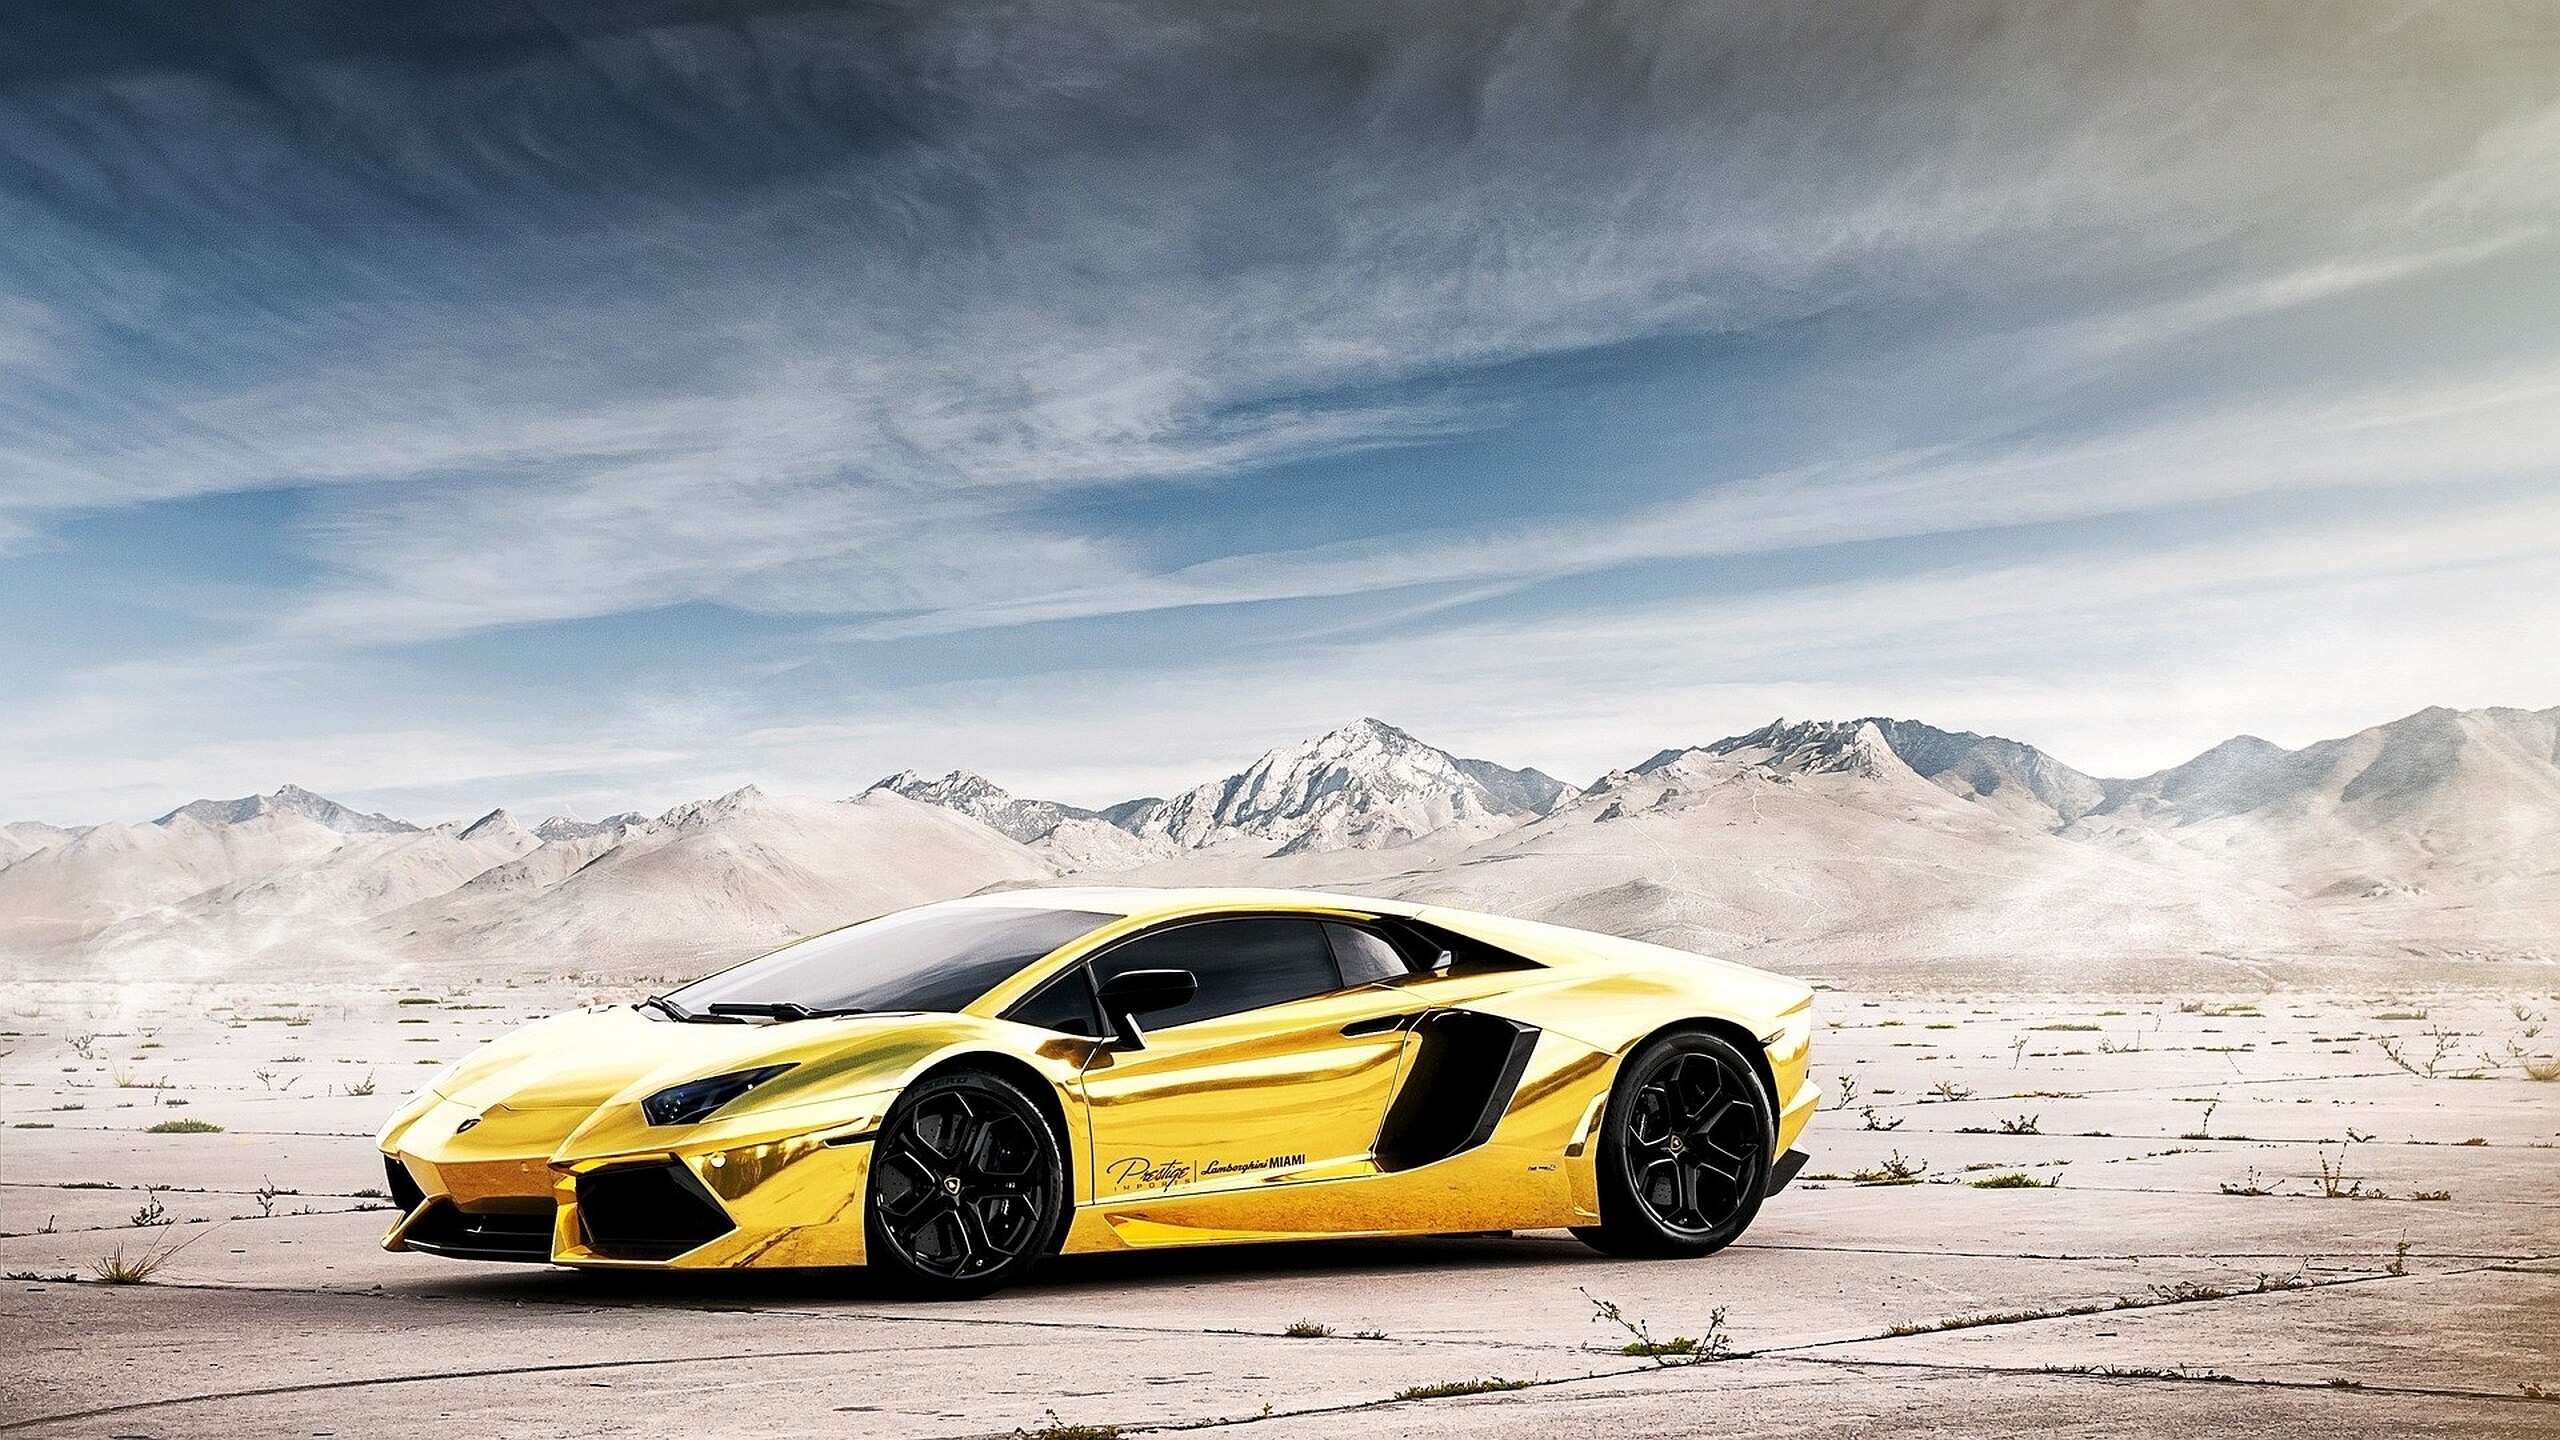 Gold Lamborghini: Aventador SVJ LP 770-4, A track focused iteration of the Aventador S and an improvement over the Aventador SV. 2560x1440 HD Background.